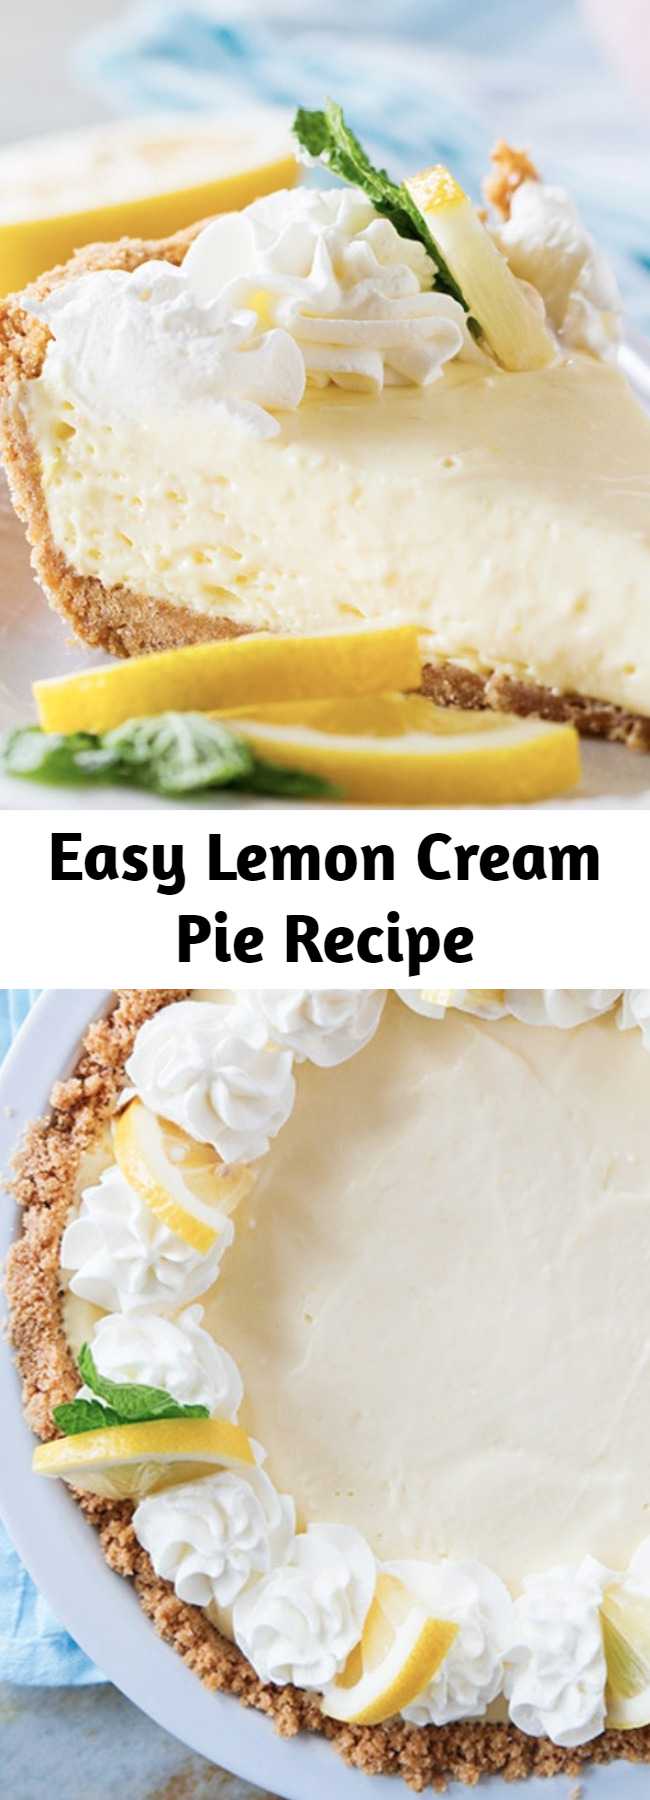 Easy Lemon Cream Pie Recipe - A simple lemon pie is only a few ingredients away! This Lemon Cream Pie comes together with very little prep, is practically fail-proof, and is a pie everyone will love!